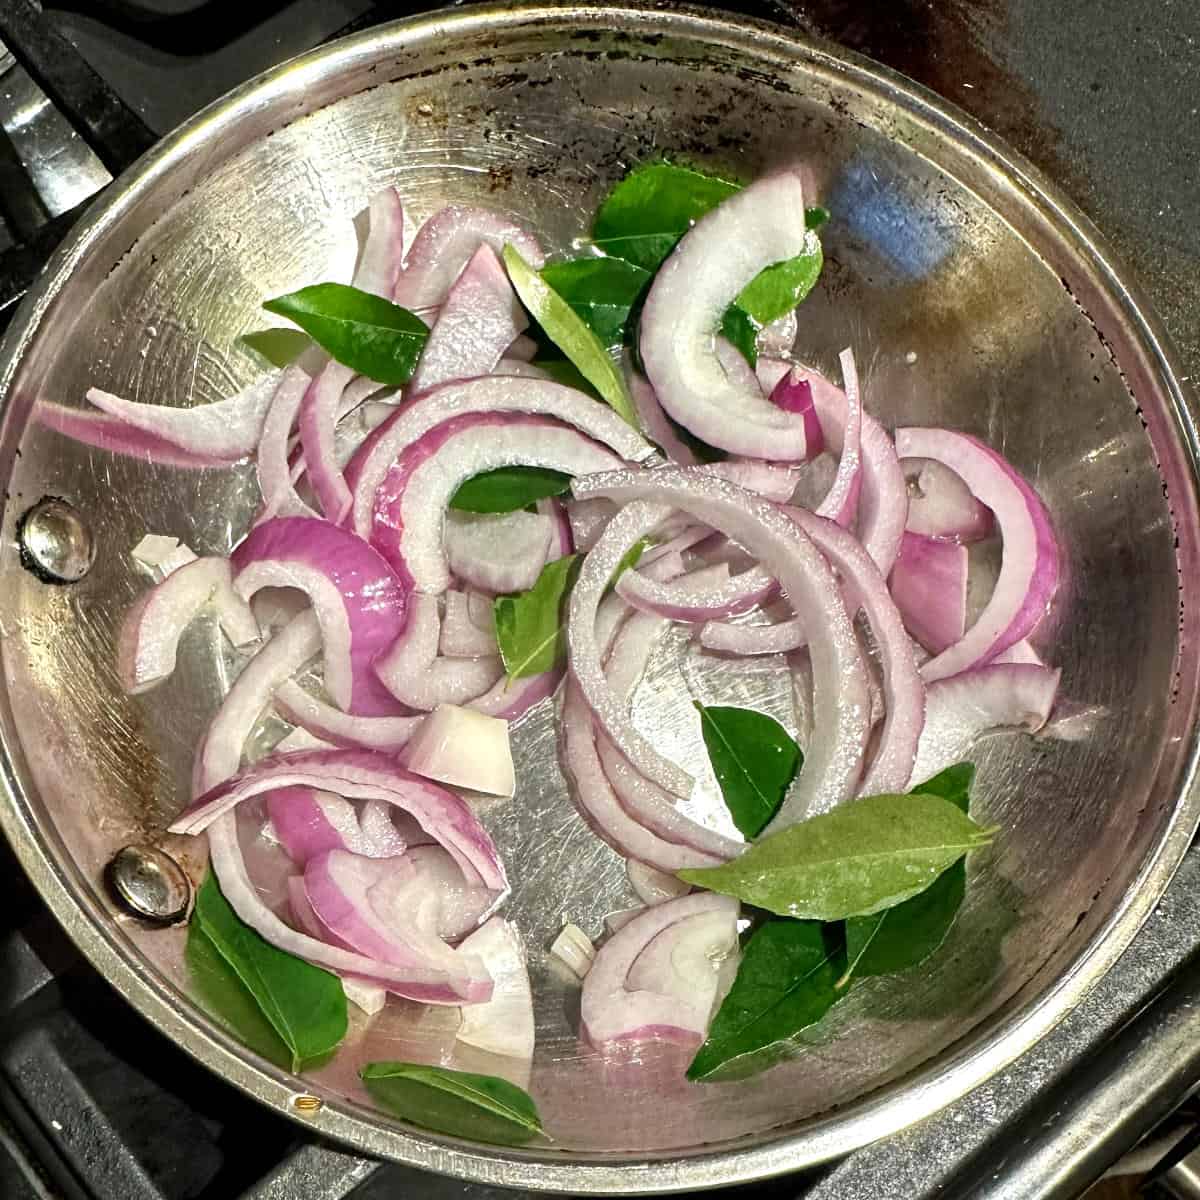 Onions and curry leaves in skillet for sambar masala.